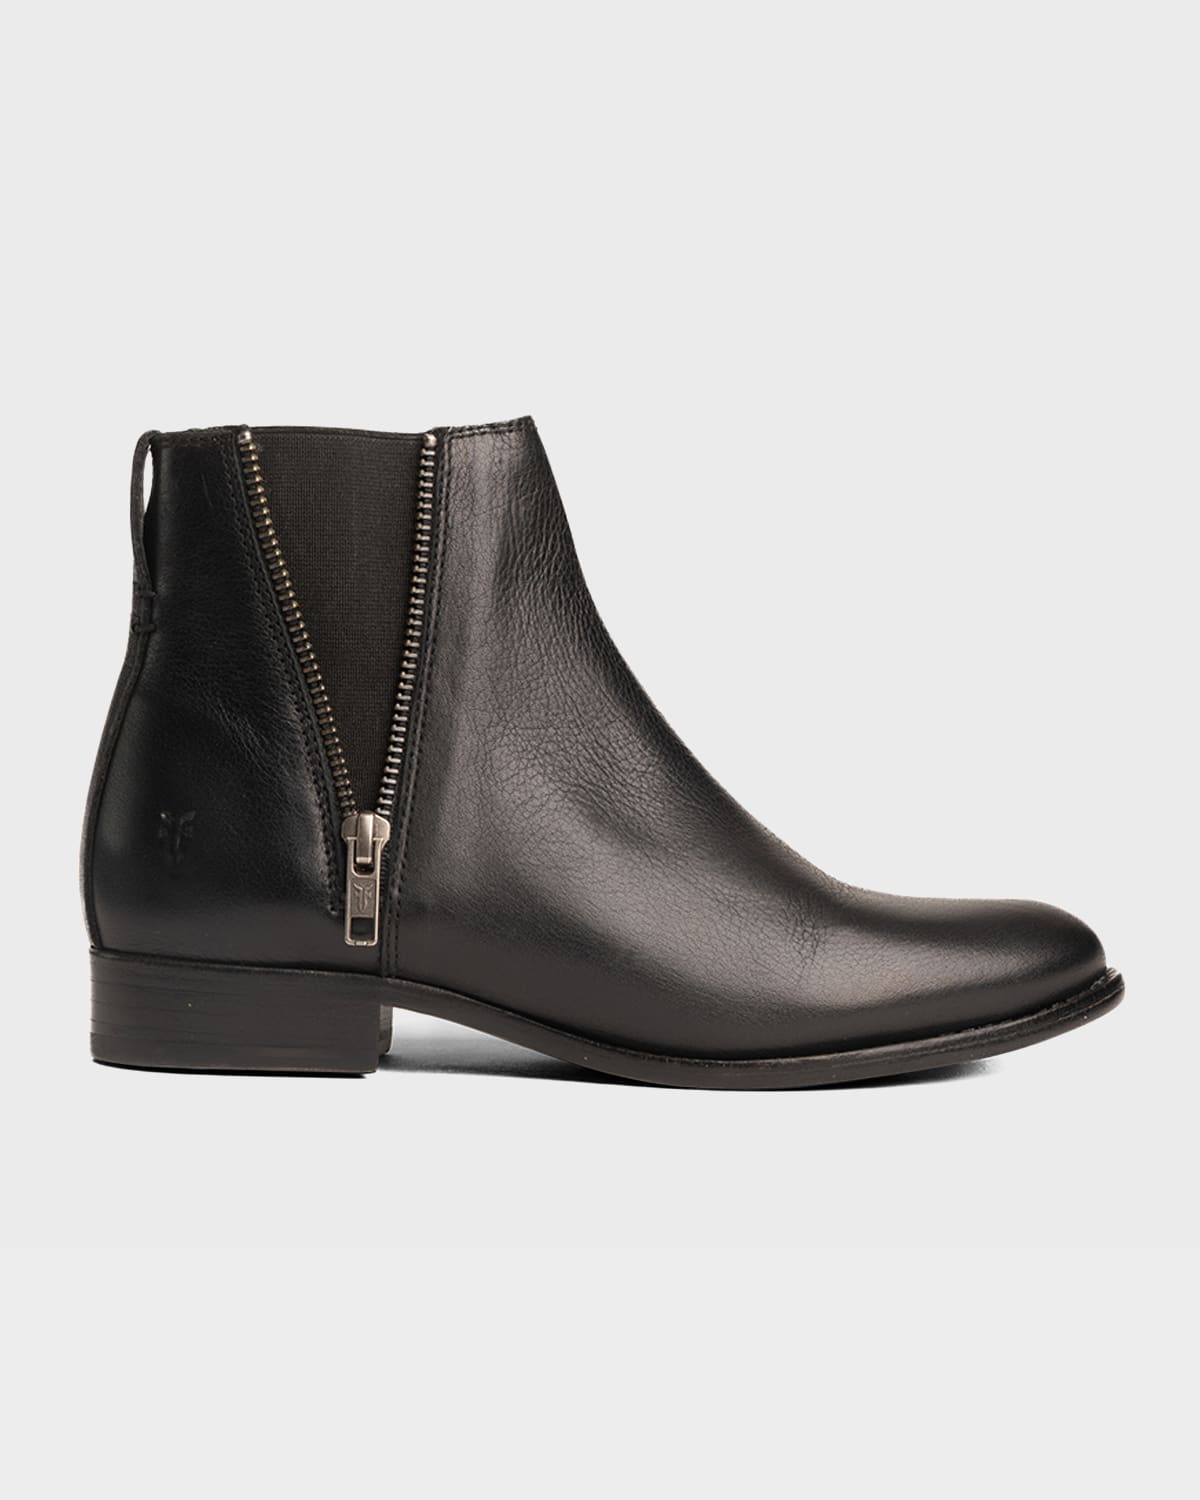 Carly Leather Zip Chelsea Booties